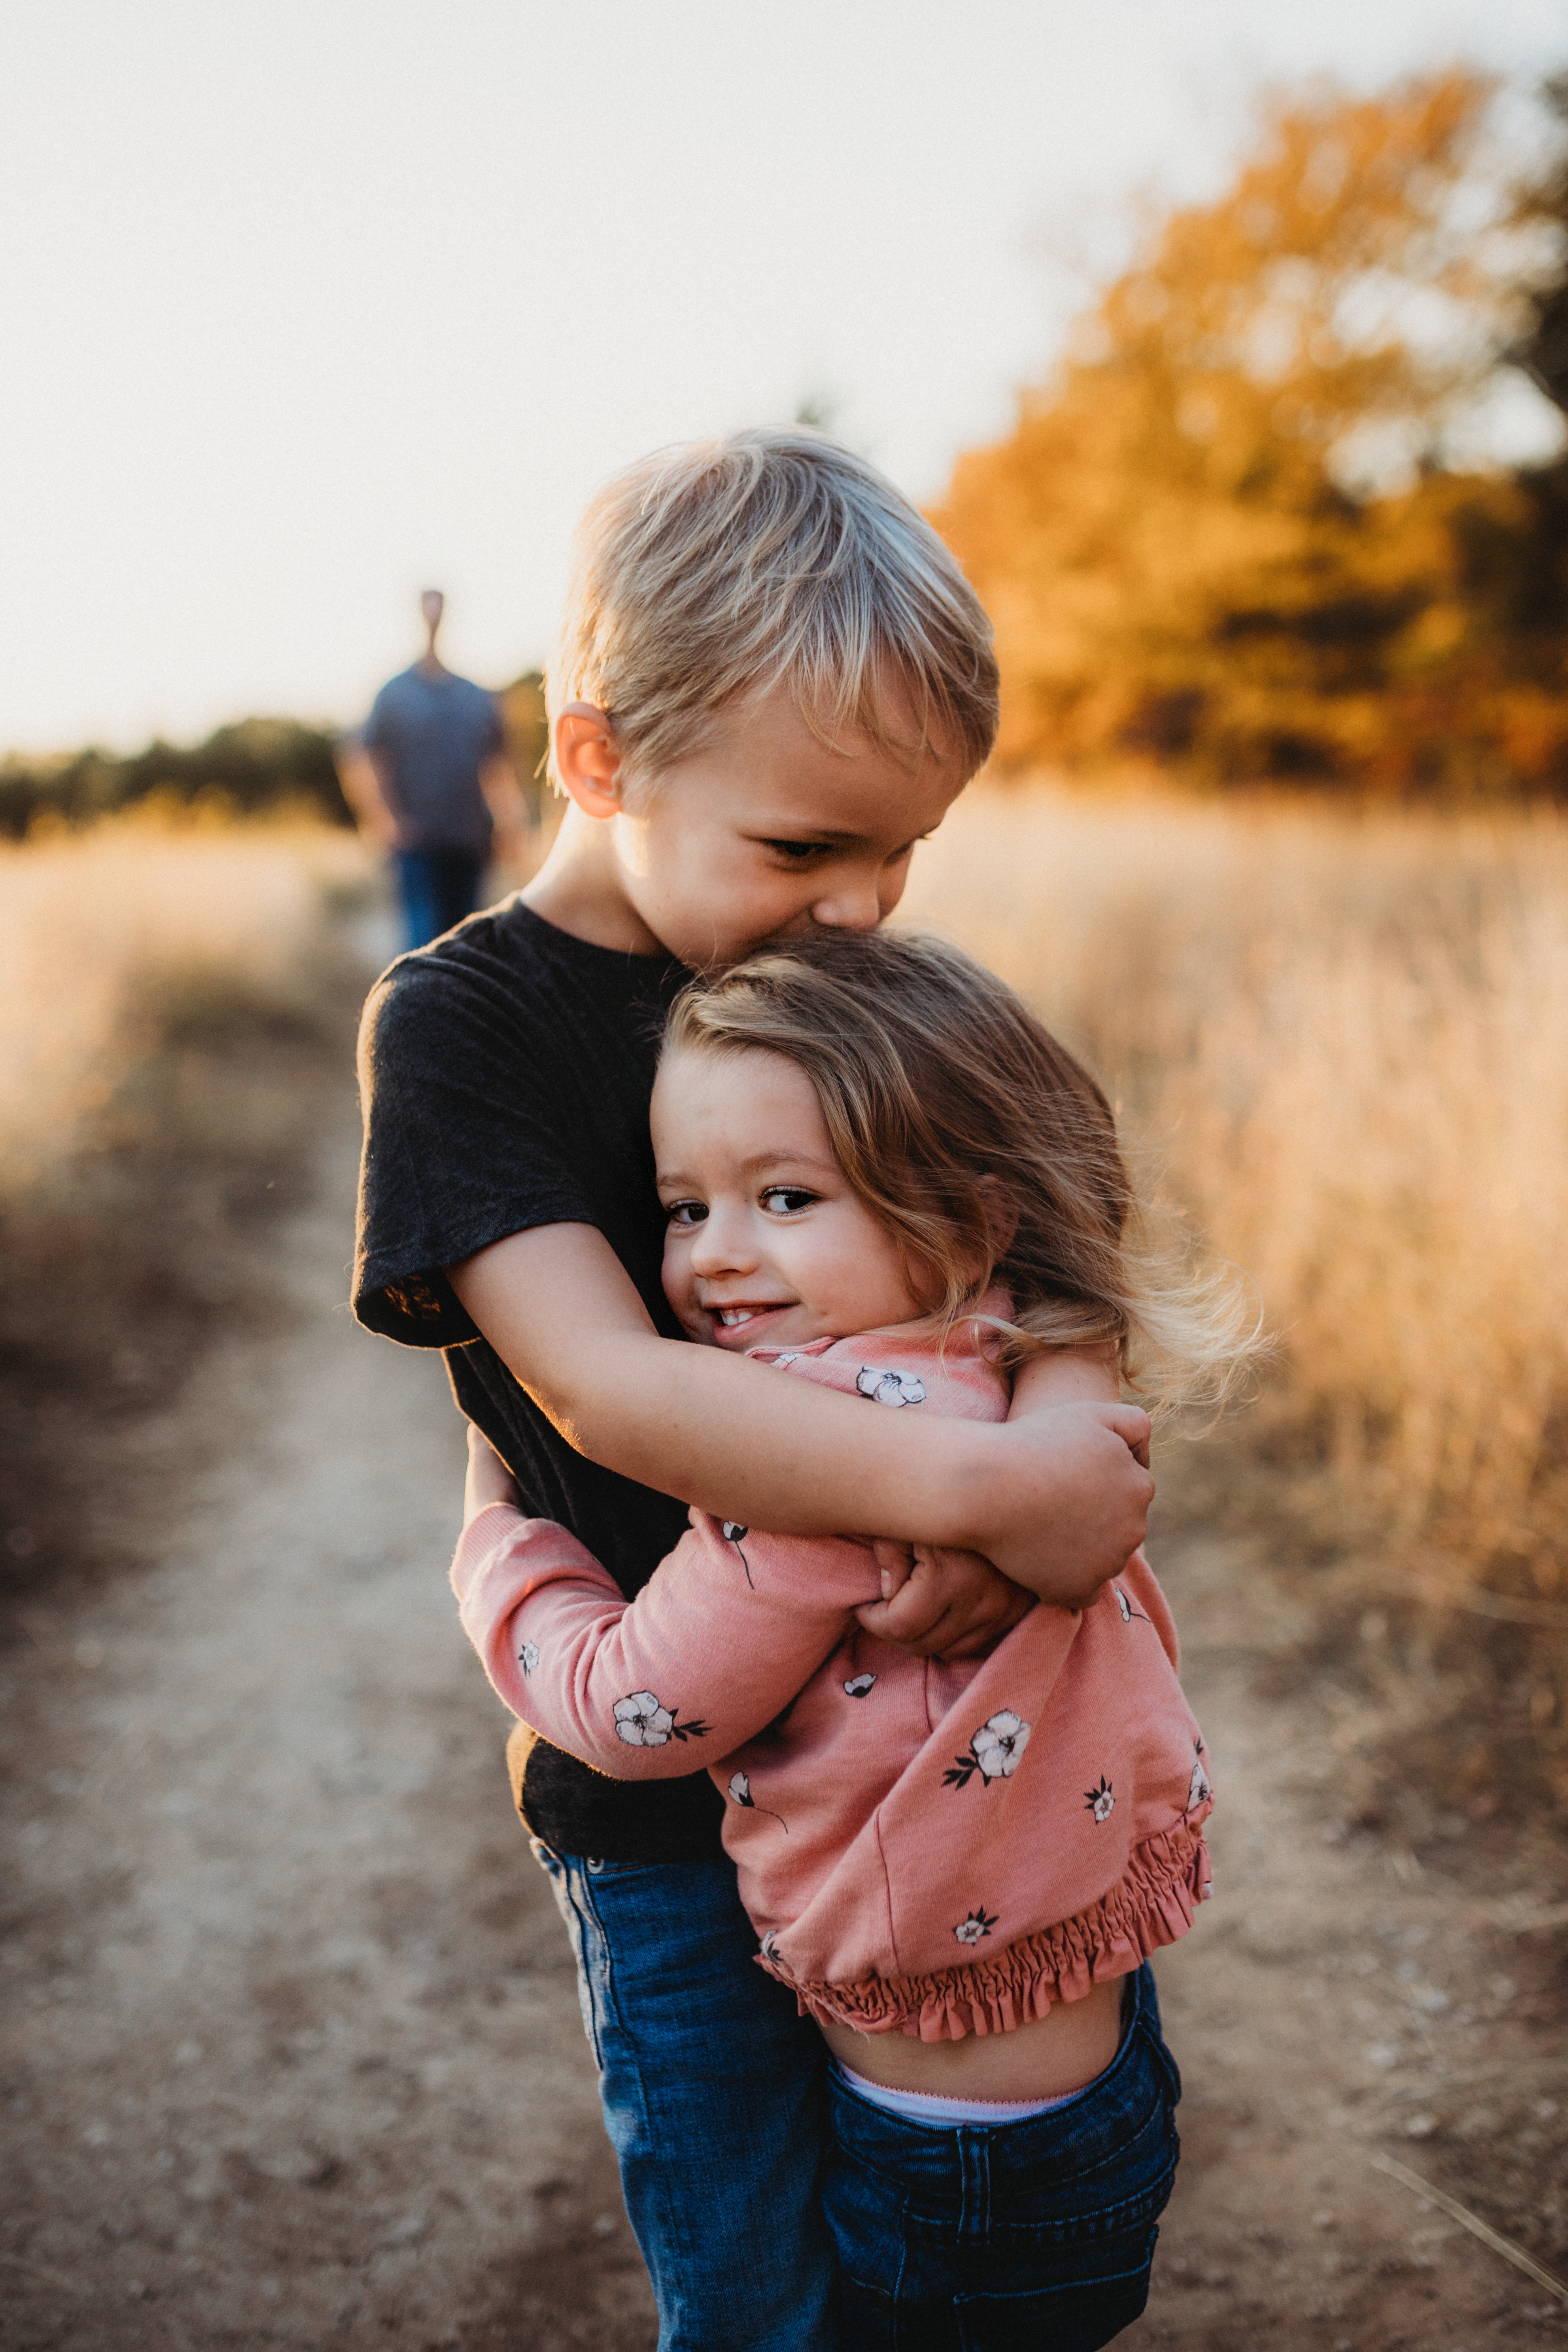 This article offers perspectives on the pros and cons of open and closed adoptions, centering on the question: how does it affect the adoptee?